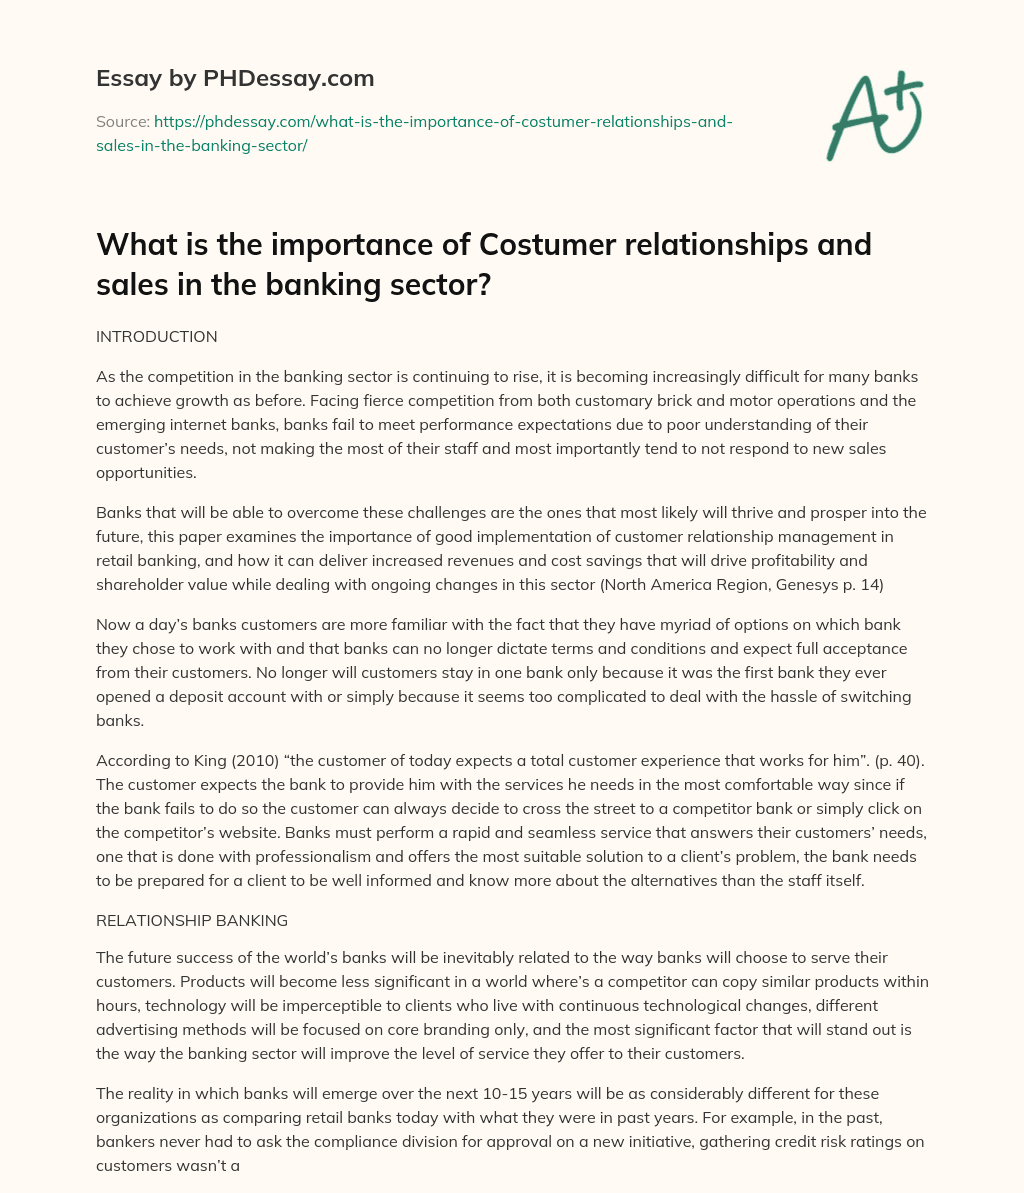 What is the importance of Costumer relationships and sales in the banking sector? essay